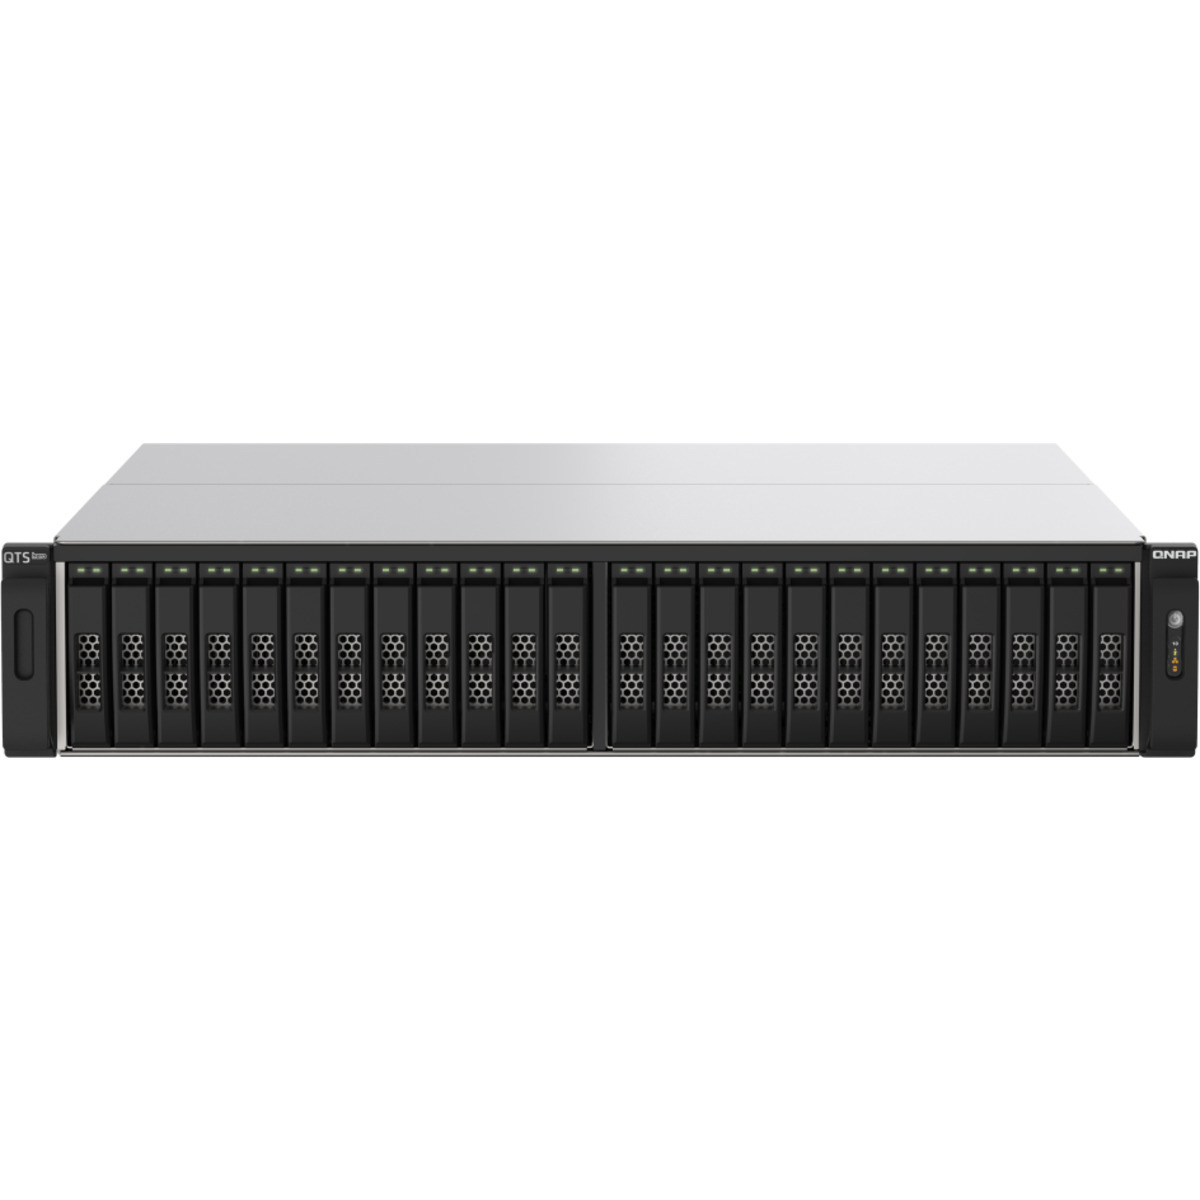 QNAP TS-h2490FU-7302P 11.5tb 24-Bay RackMount Large Business / Enterprise NAS - Network Attached Storage Device 23x500gb Samsung 980 PRO MZ-V8P500  6900/5000MB/s M.2 2280 NVMe SSD ENTERPRISE Class Drives Installed - Burn-In Tested TS-h2490FU-7302P